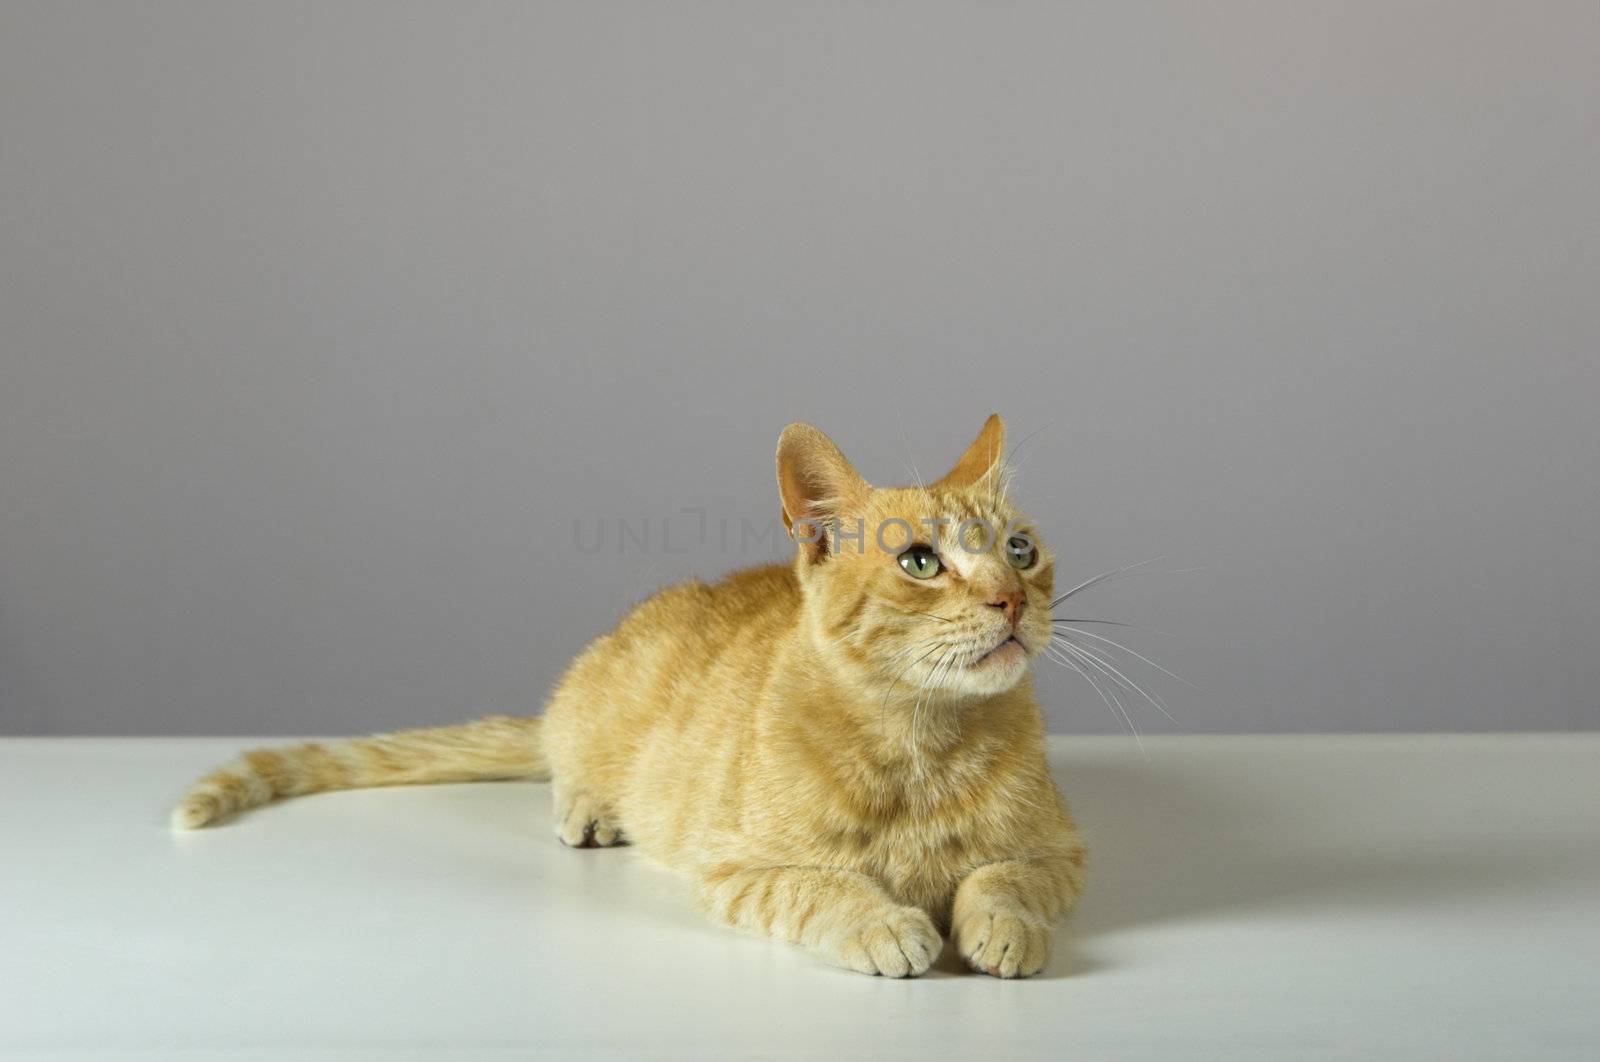 Studio shot of a beautiful kitteen (more pictures of the same cat on my gallery)